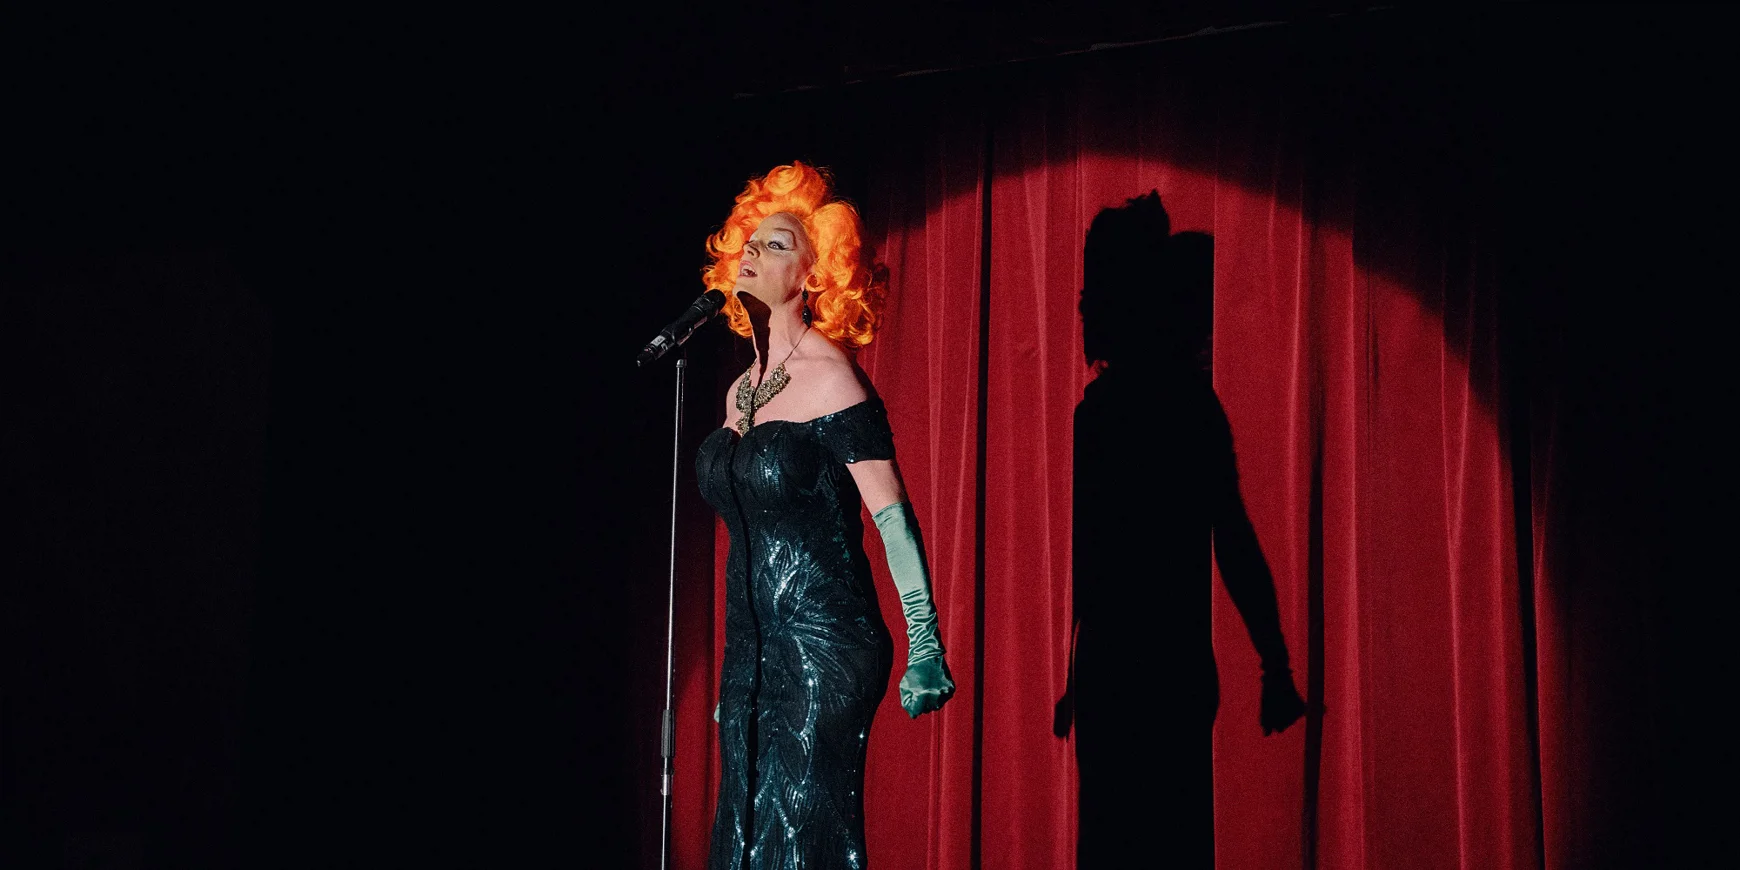 Decorative image: Drag queen singing on stage